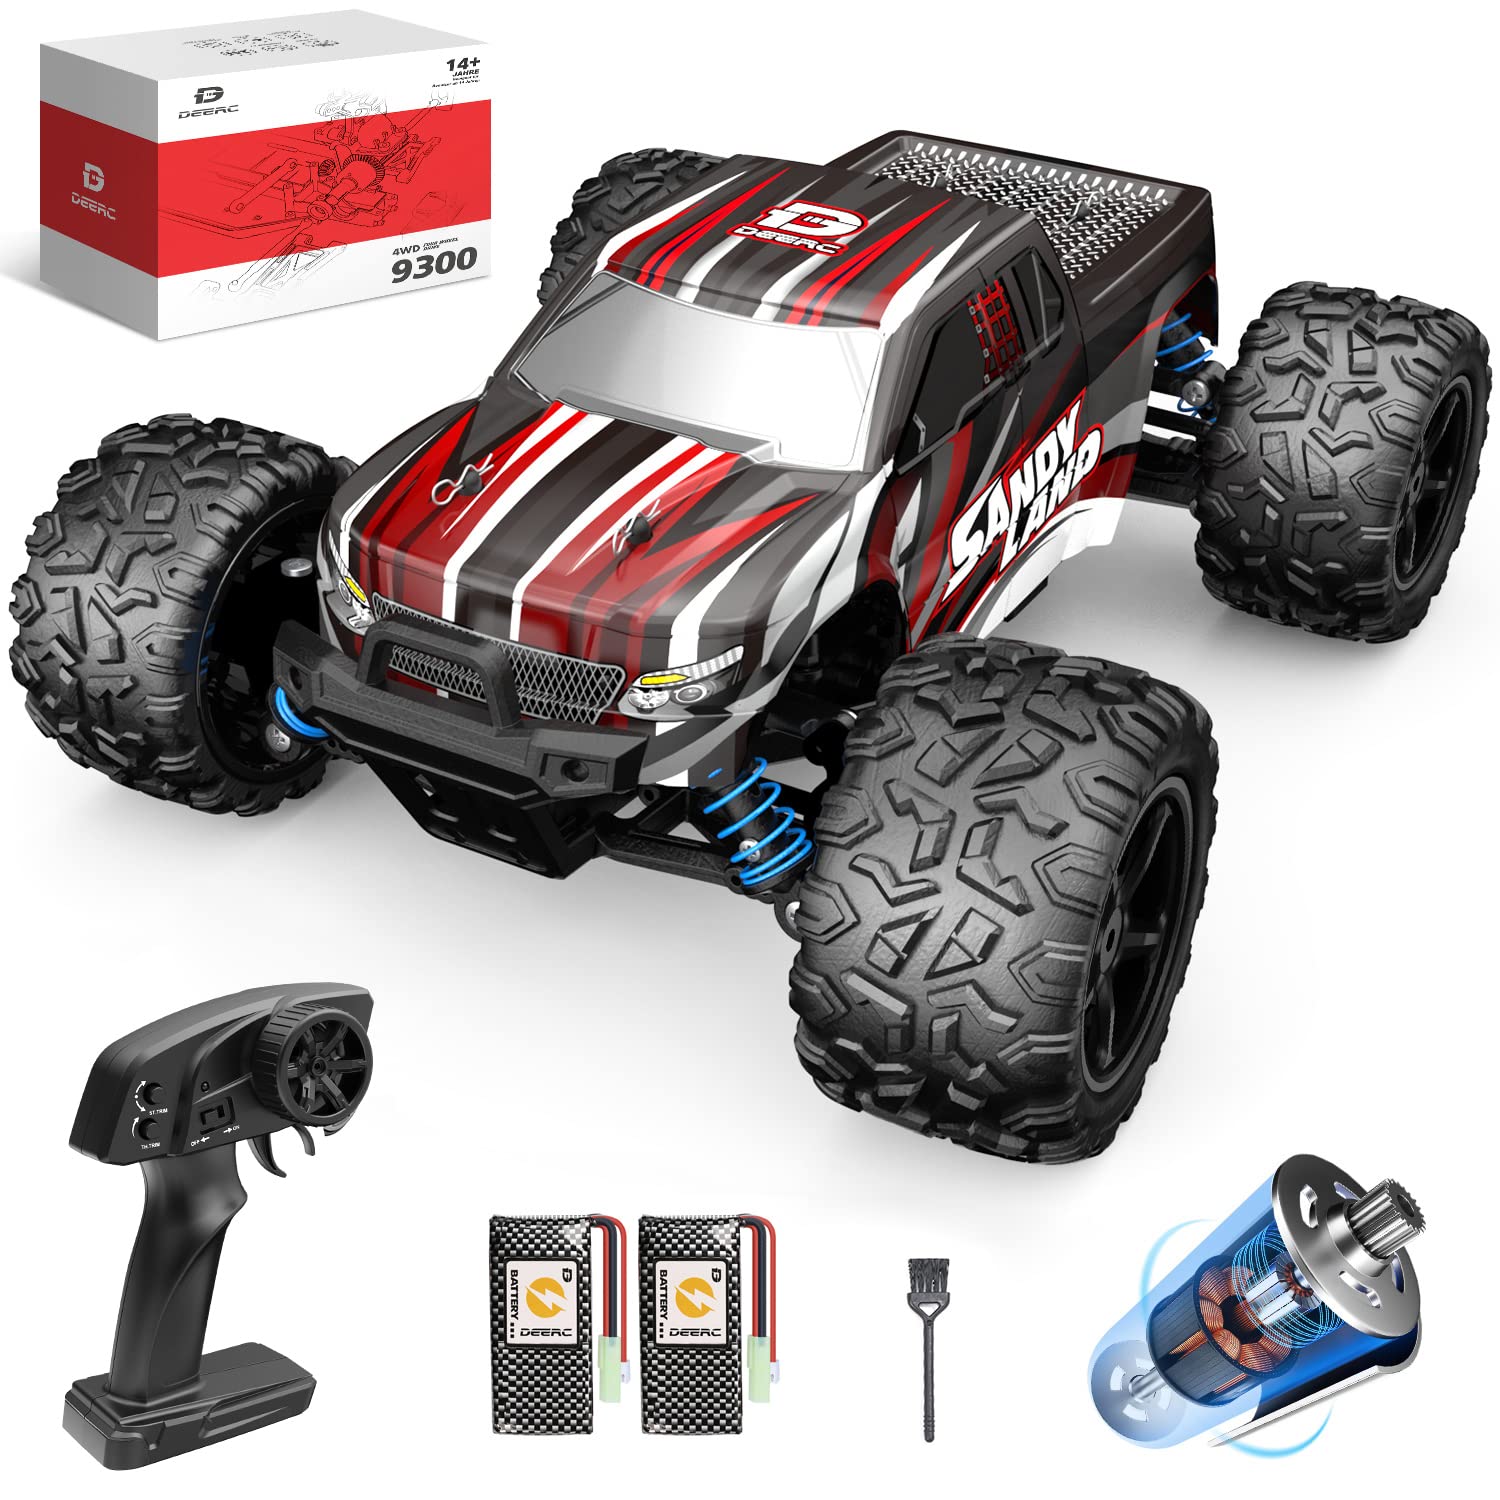 DEERC 9300 Remote Control Car High Speed RC Cars for Kids Adults $48.99